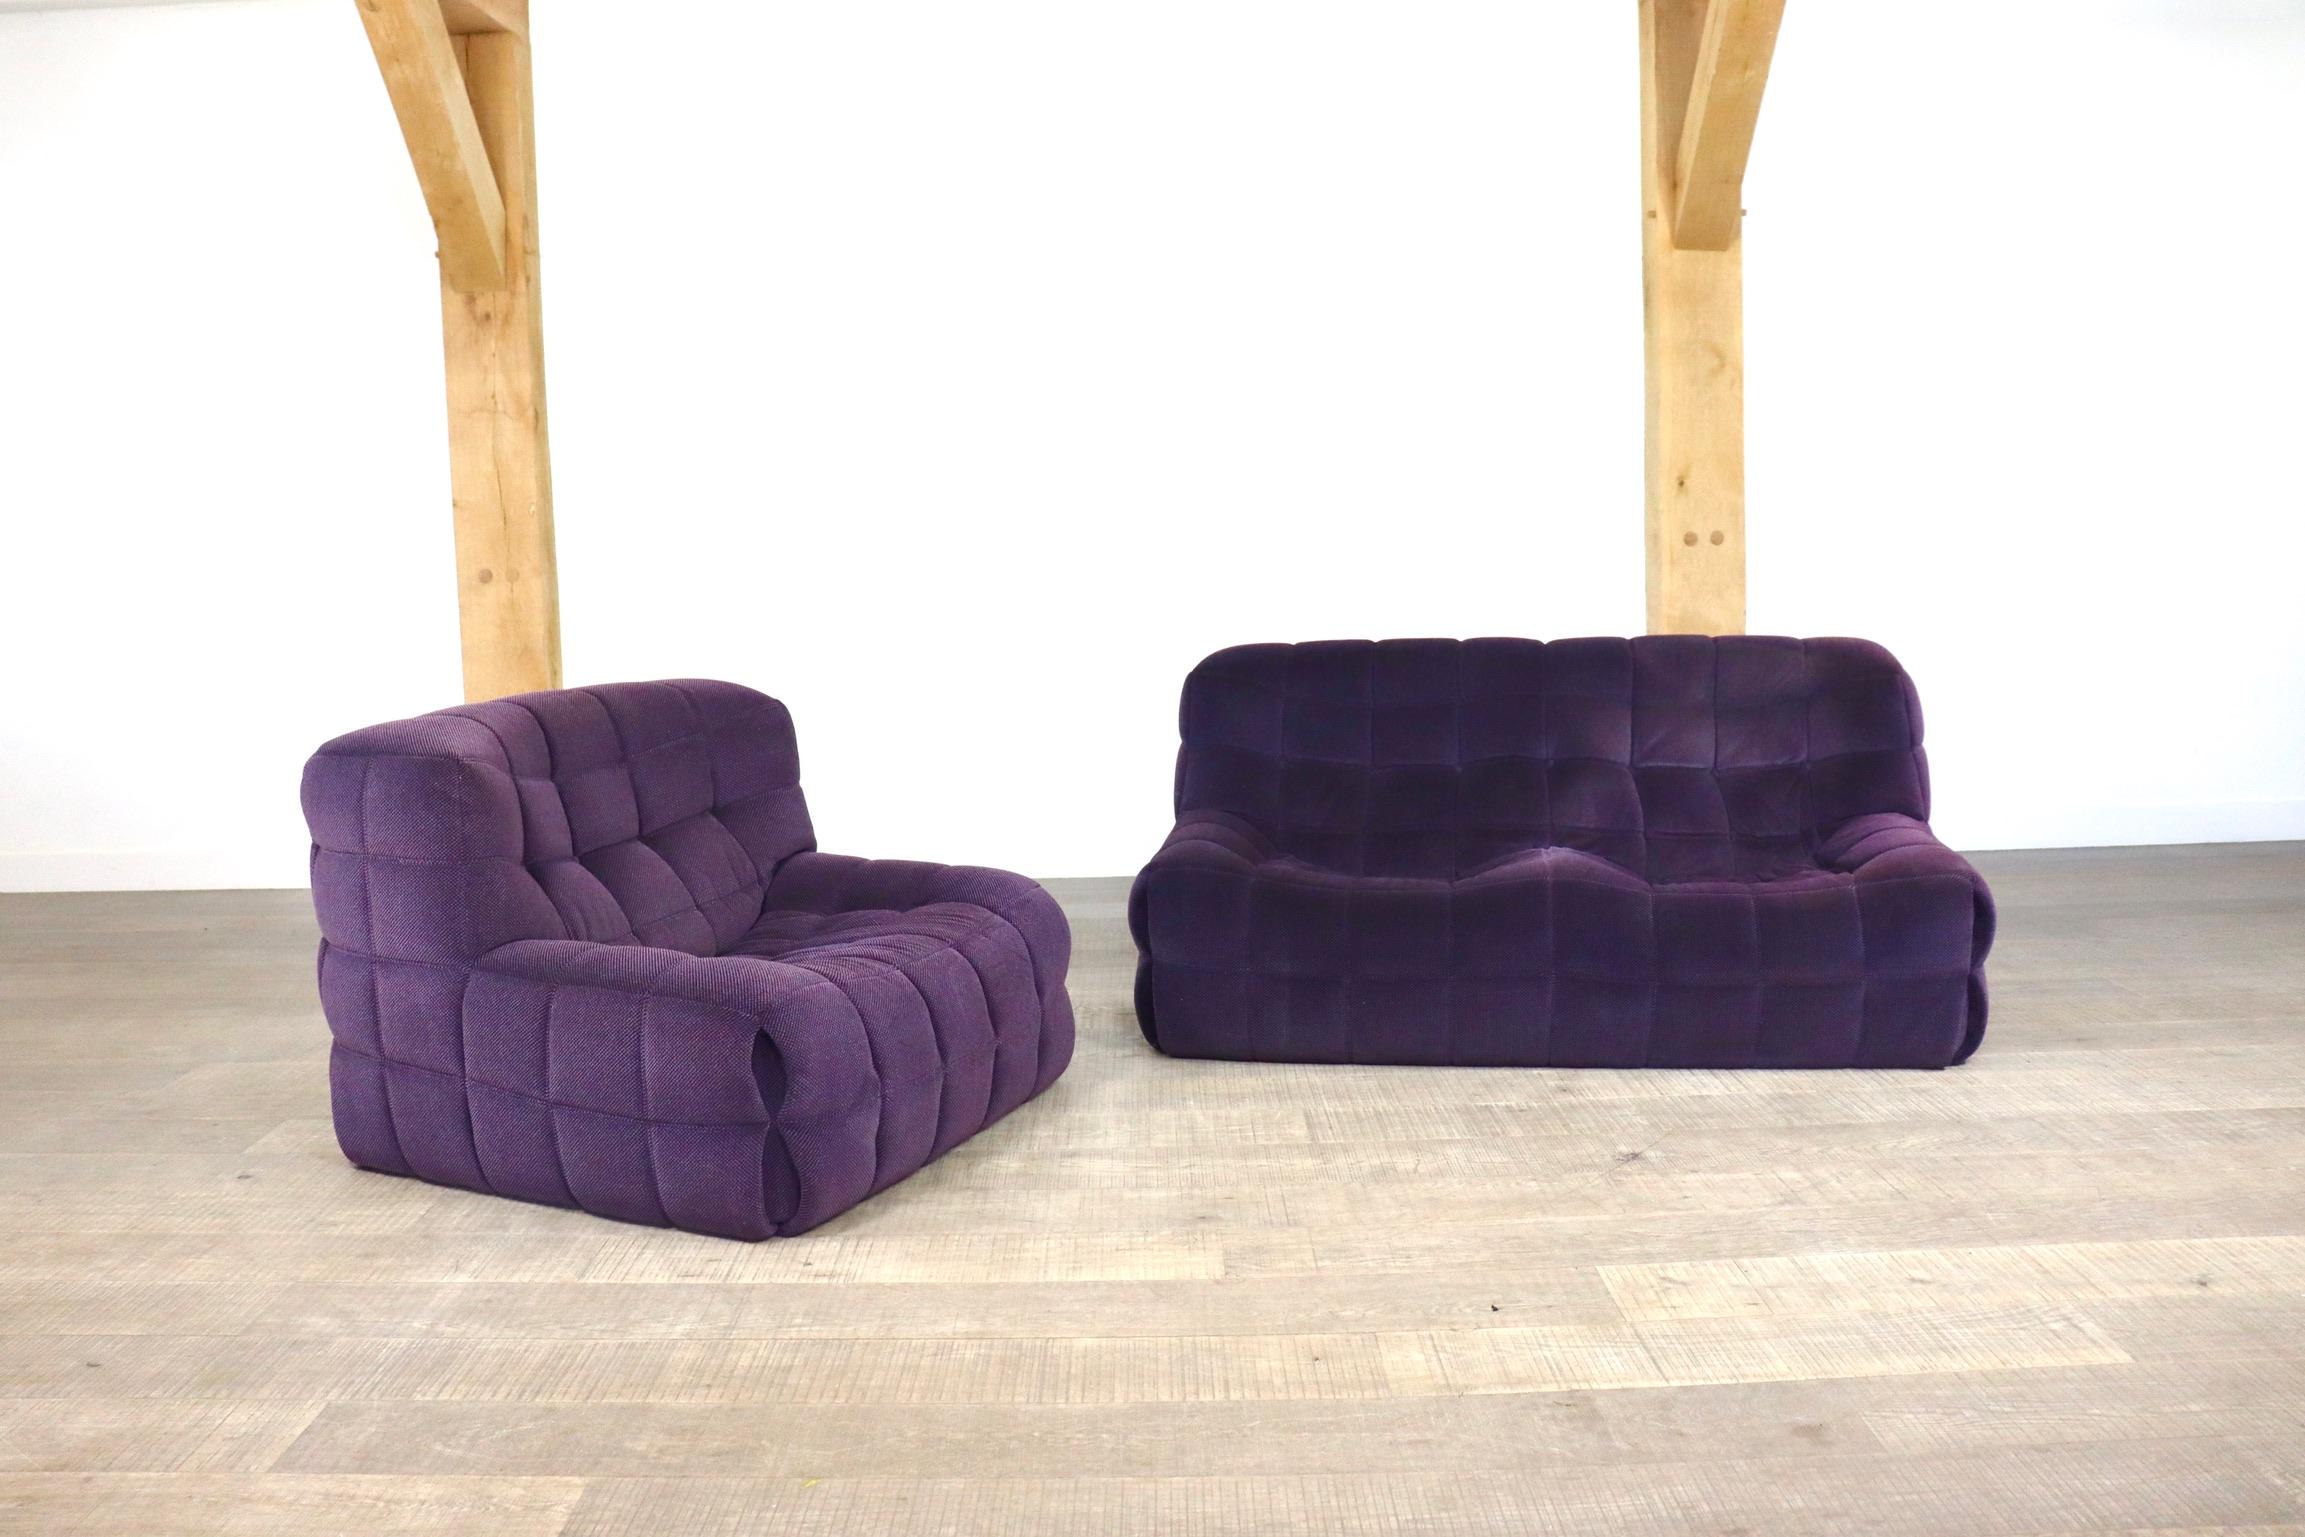 Stunning and extremely comfortable Kashima lounge chair and sofa in purple velvet by Michel Ducaroy for Ligne Roset, 1970s. The soft original velvet upholstery gives the lounge set the looks as well as great comfort. With the foam still in really